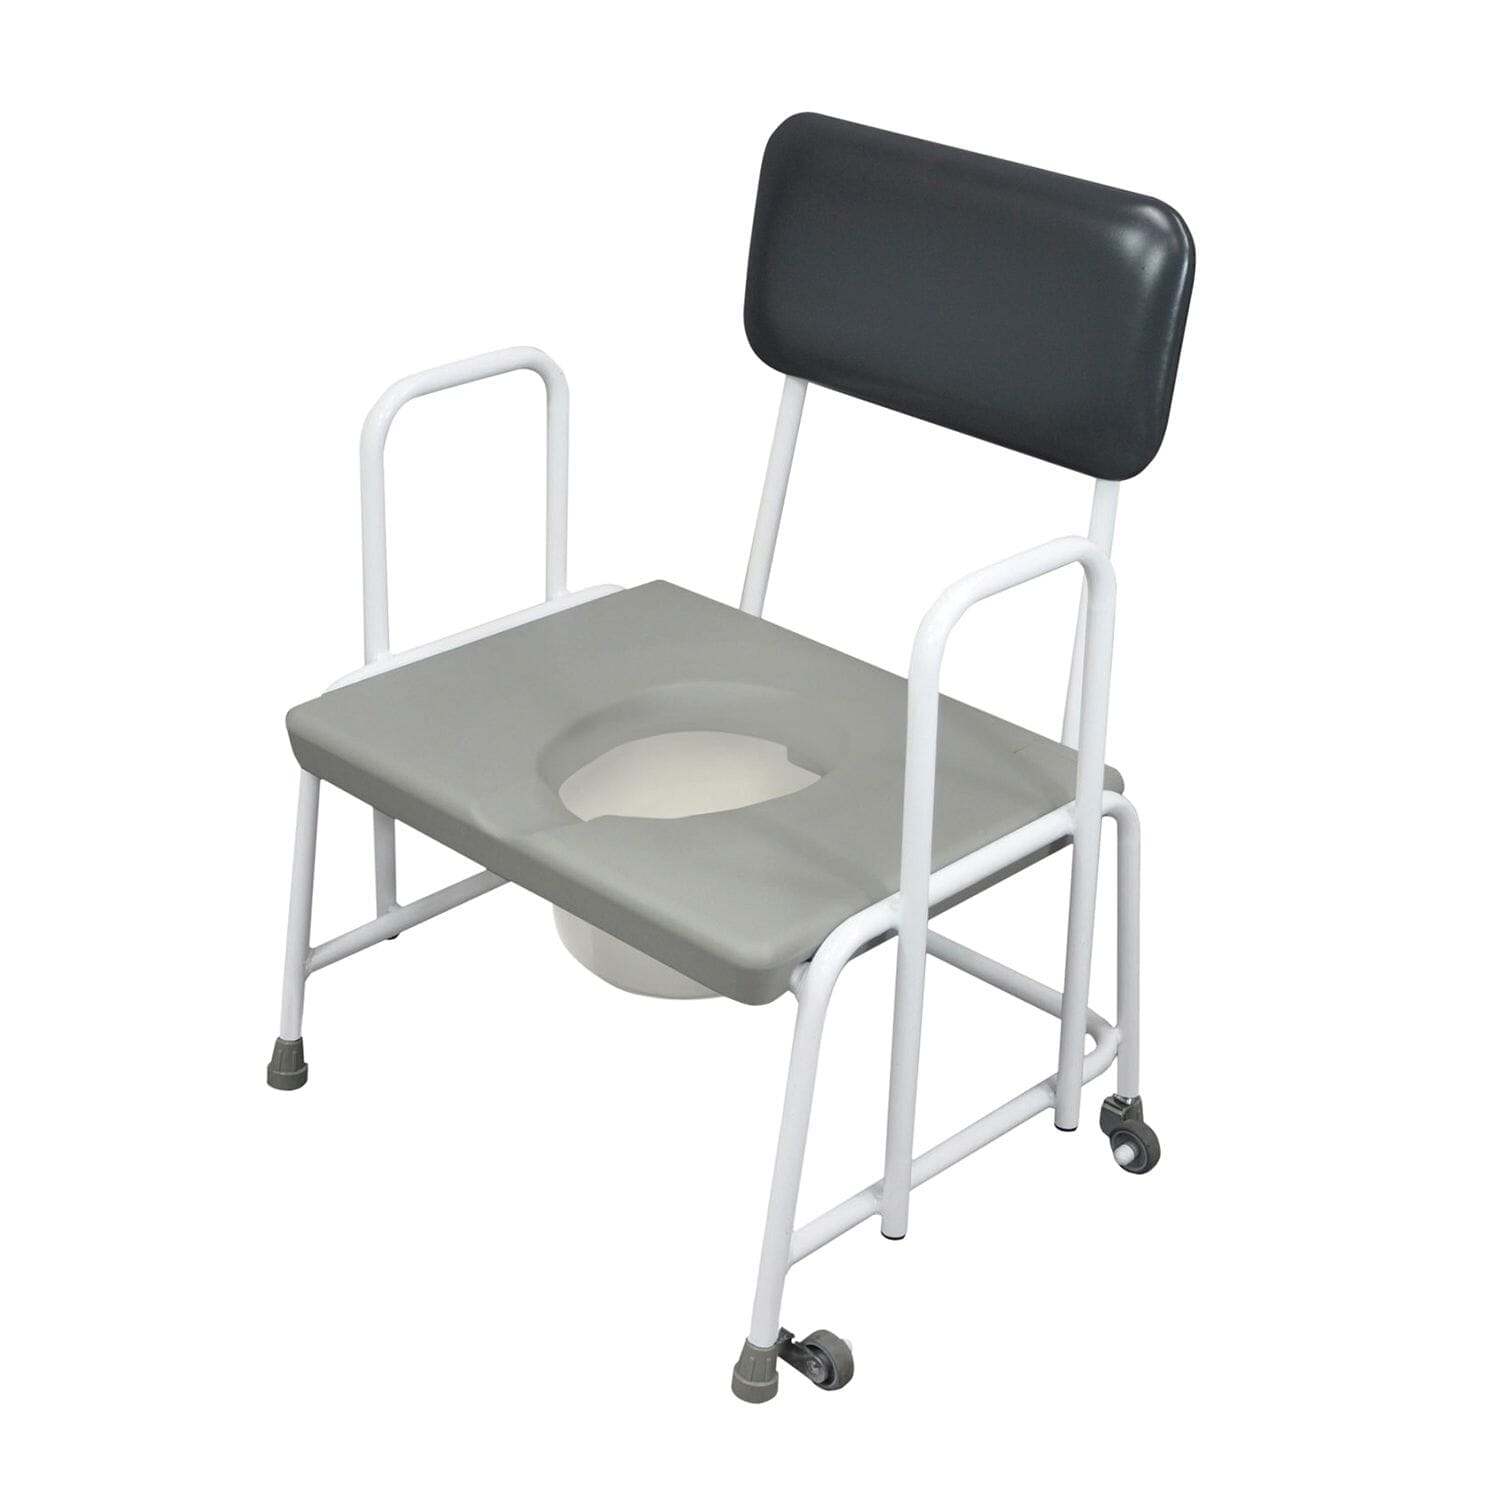 View Dorset Devon and Suffolk Bariatric Commodes Fixed Arms information